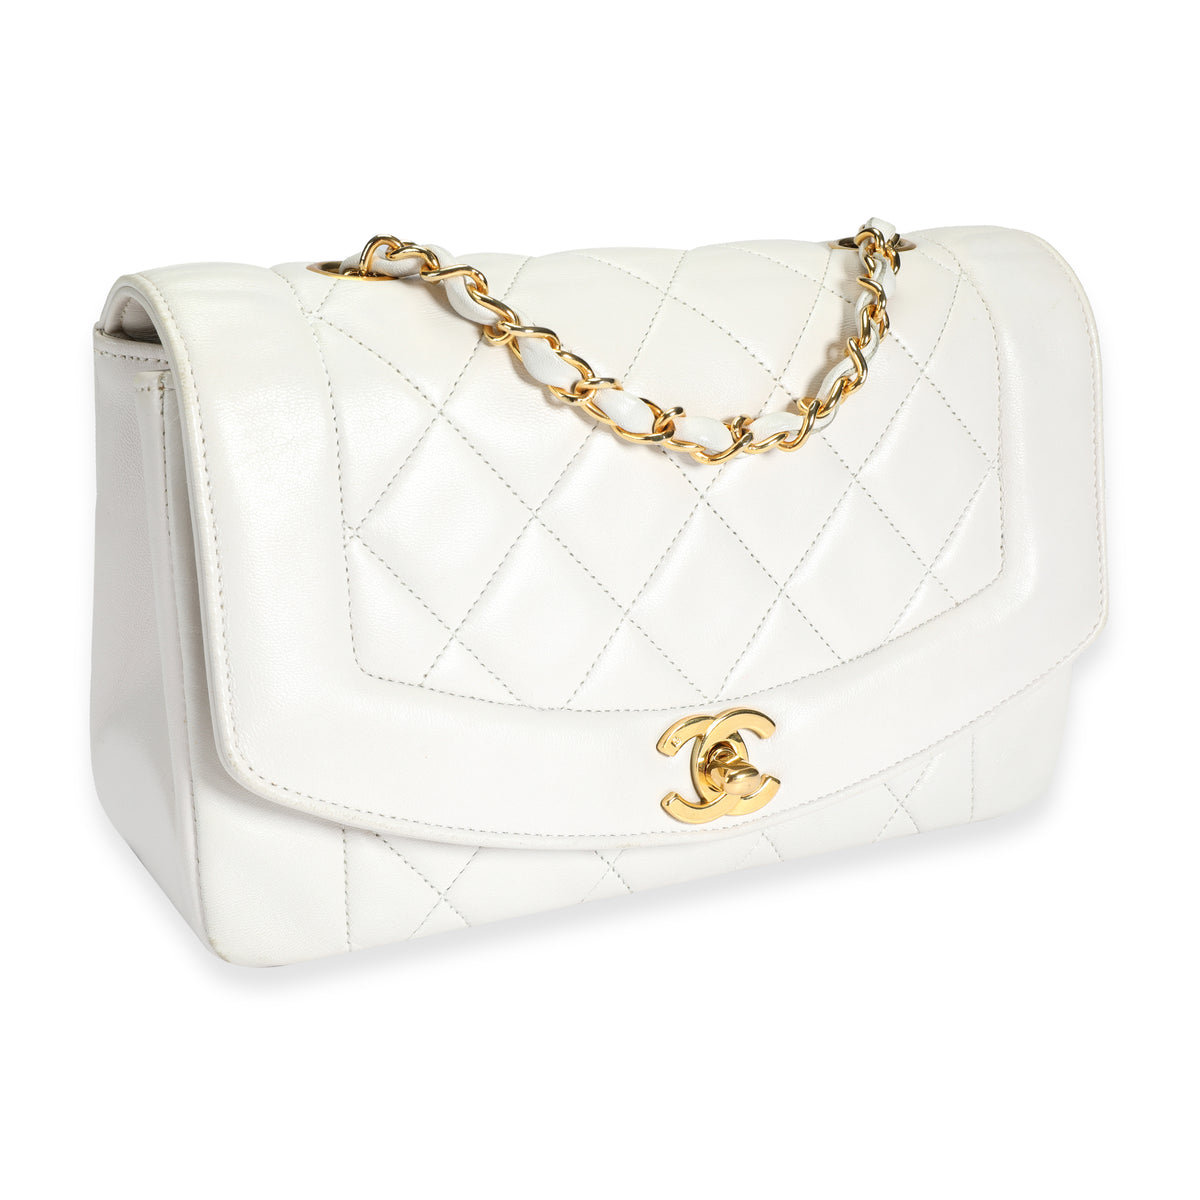 Chanel Vintage White Quilted Lambskin Diana Bag